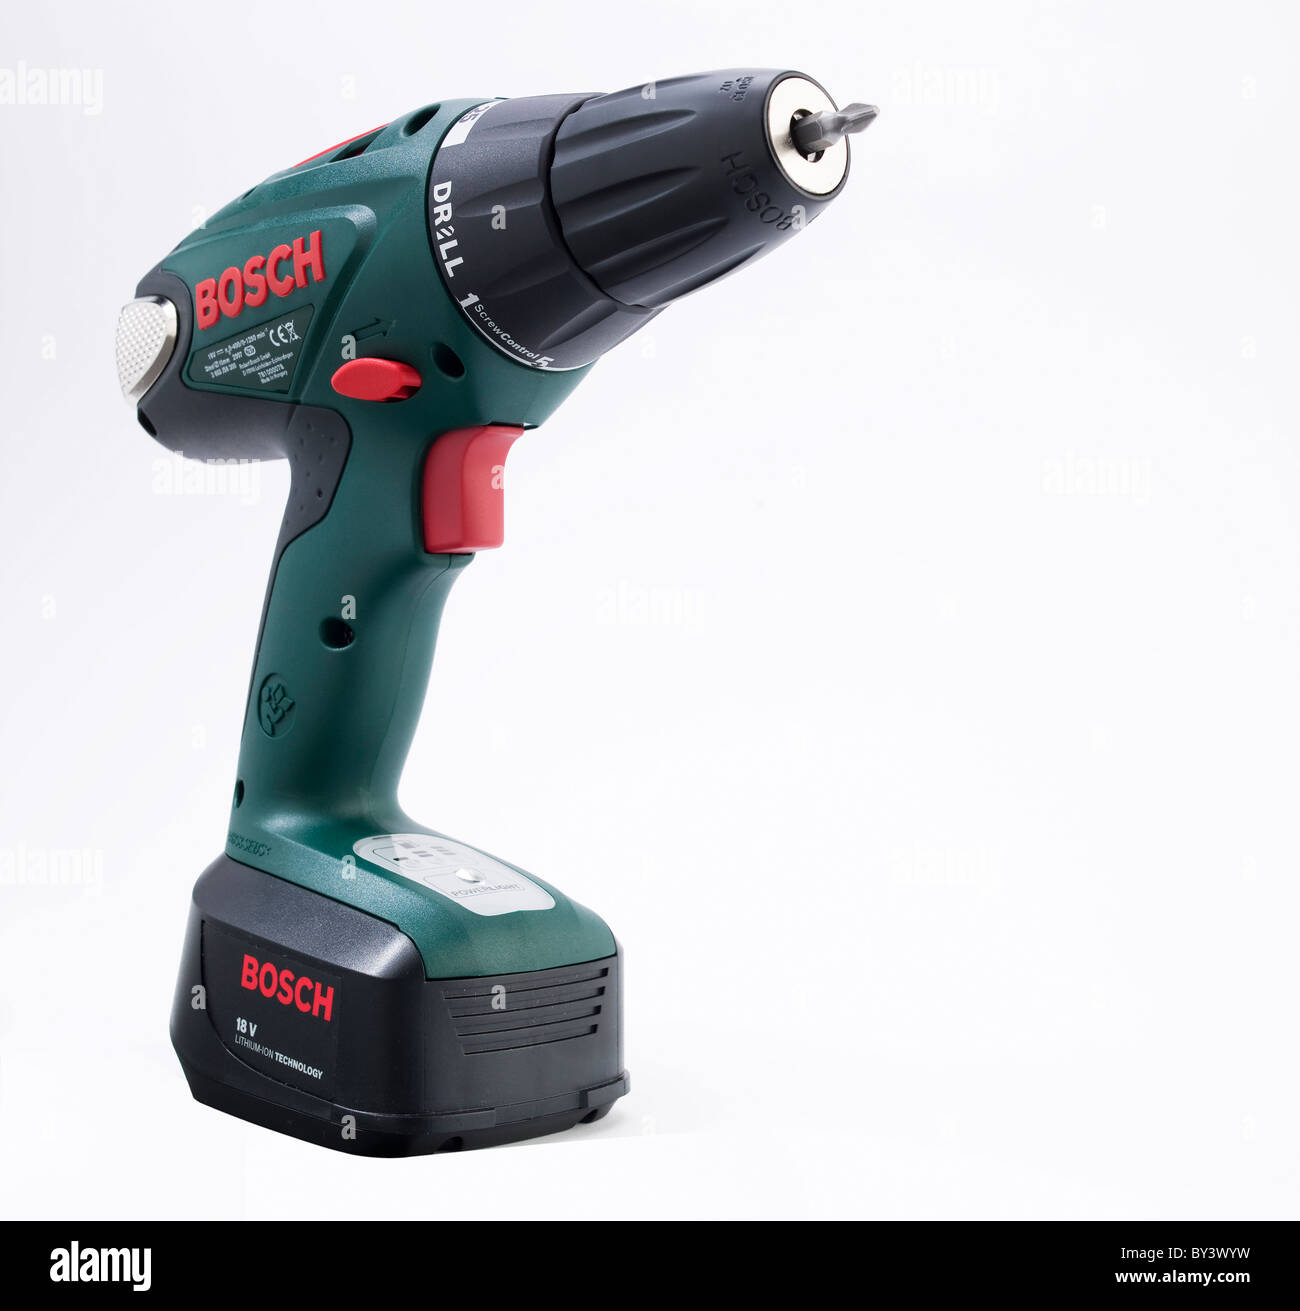 Bosch Drill High Resolution Stock Photography and Images - Alamy